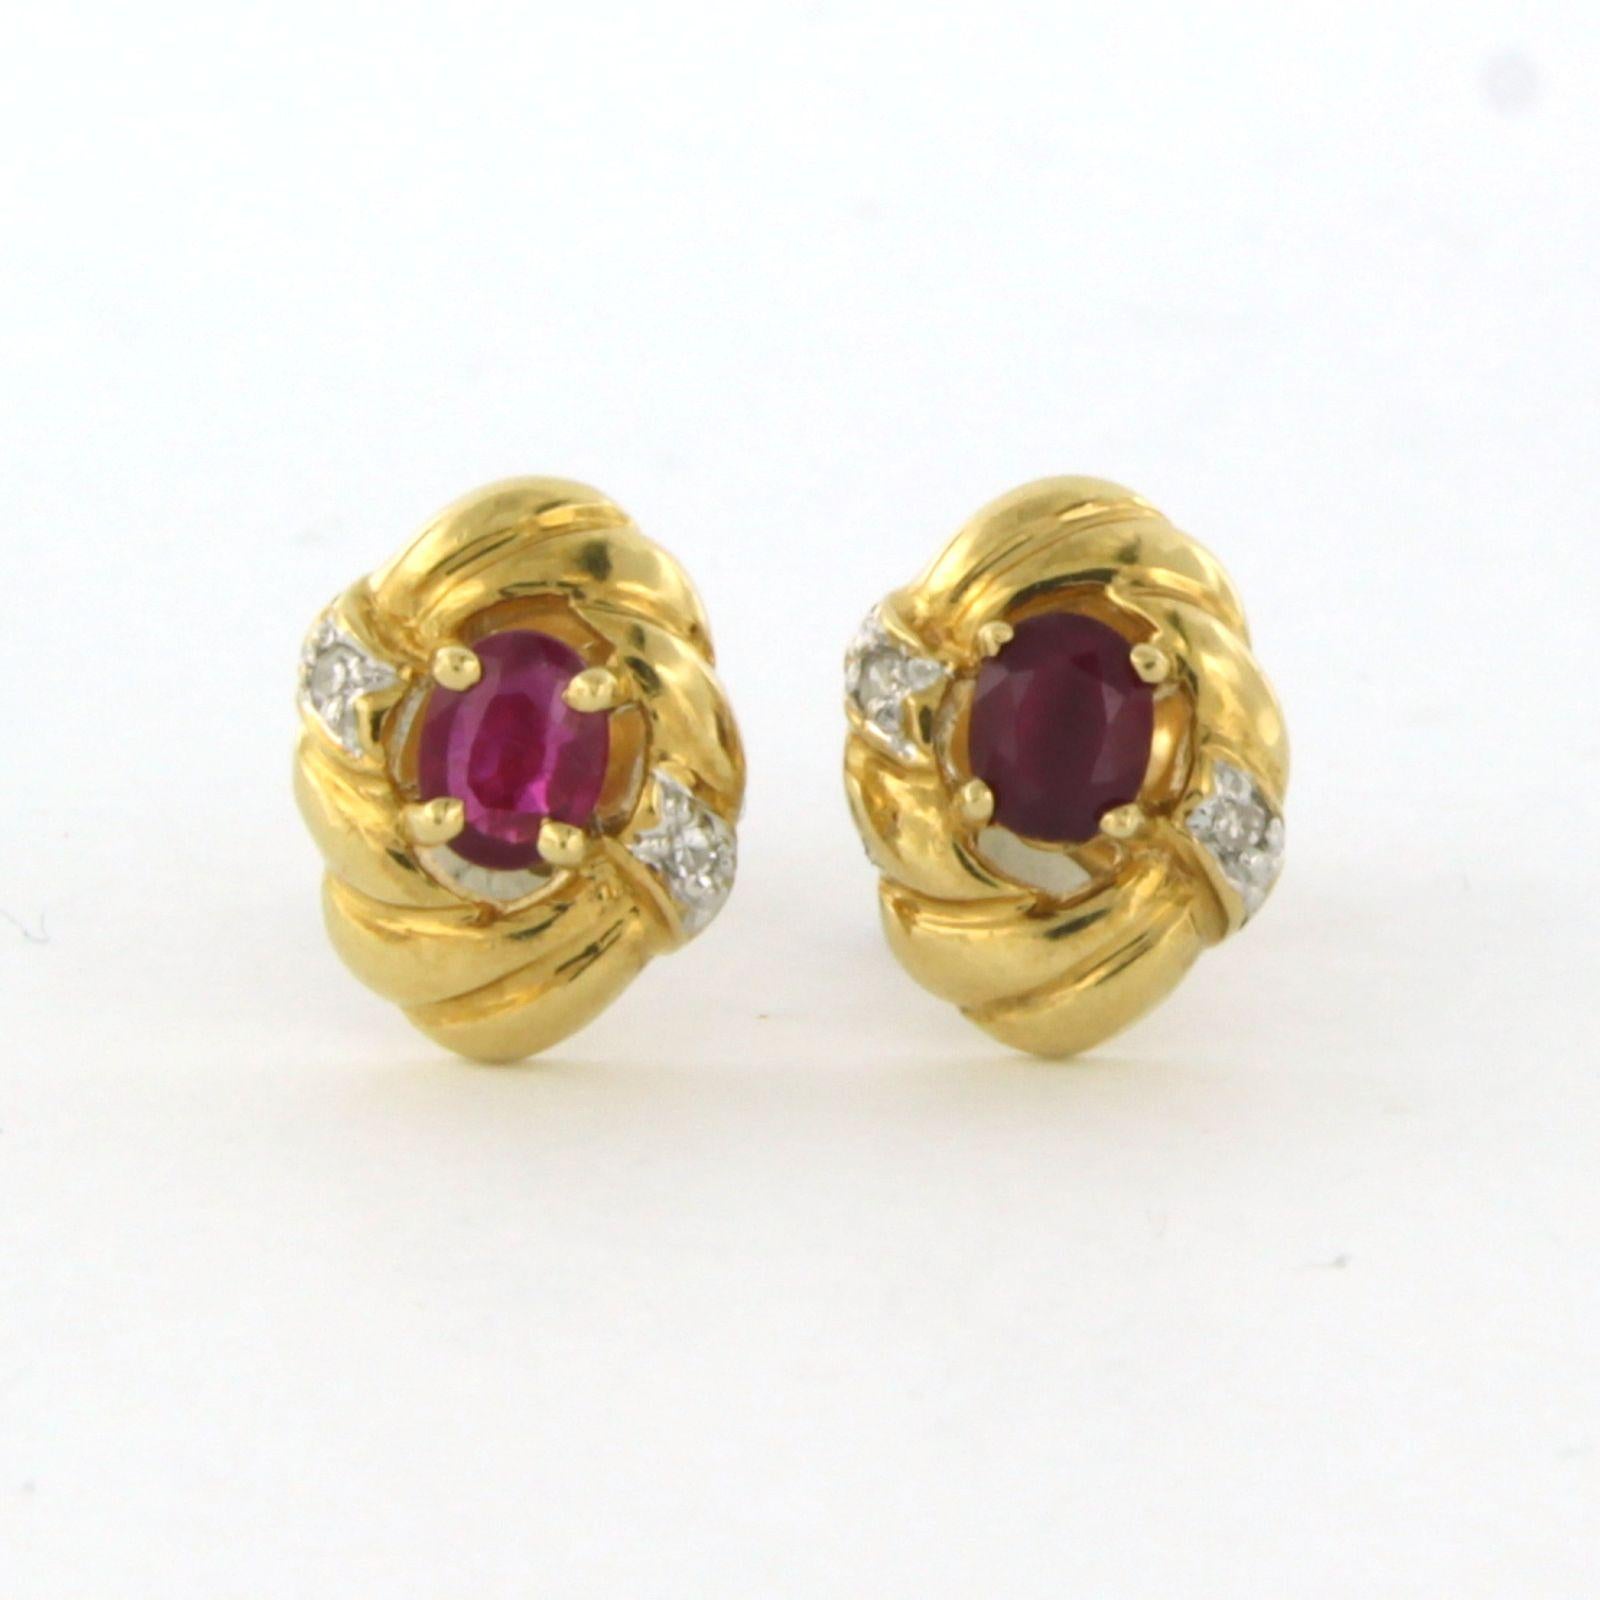 18k bicolor gold earrings set with ruby ​​and single cut diamonds. approximately 0.02 ct - F/G - VS/SI

detailed description:

the size of the earring is 1.0 cm high and 7.8 mm wide
 
Total weight 2.4 grams

set with

- 2 x 4.0 mm x 3.0 mm oval